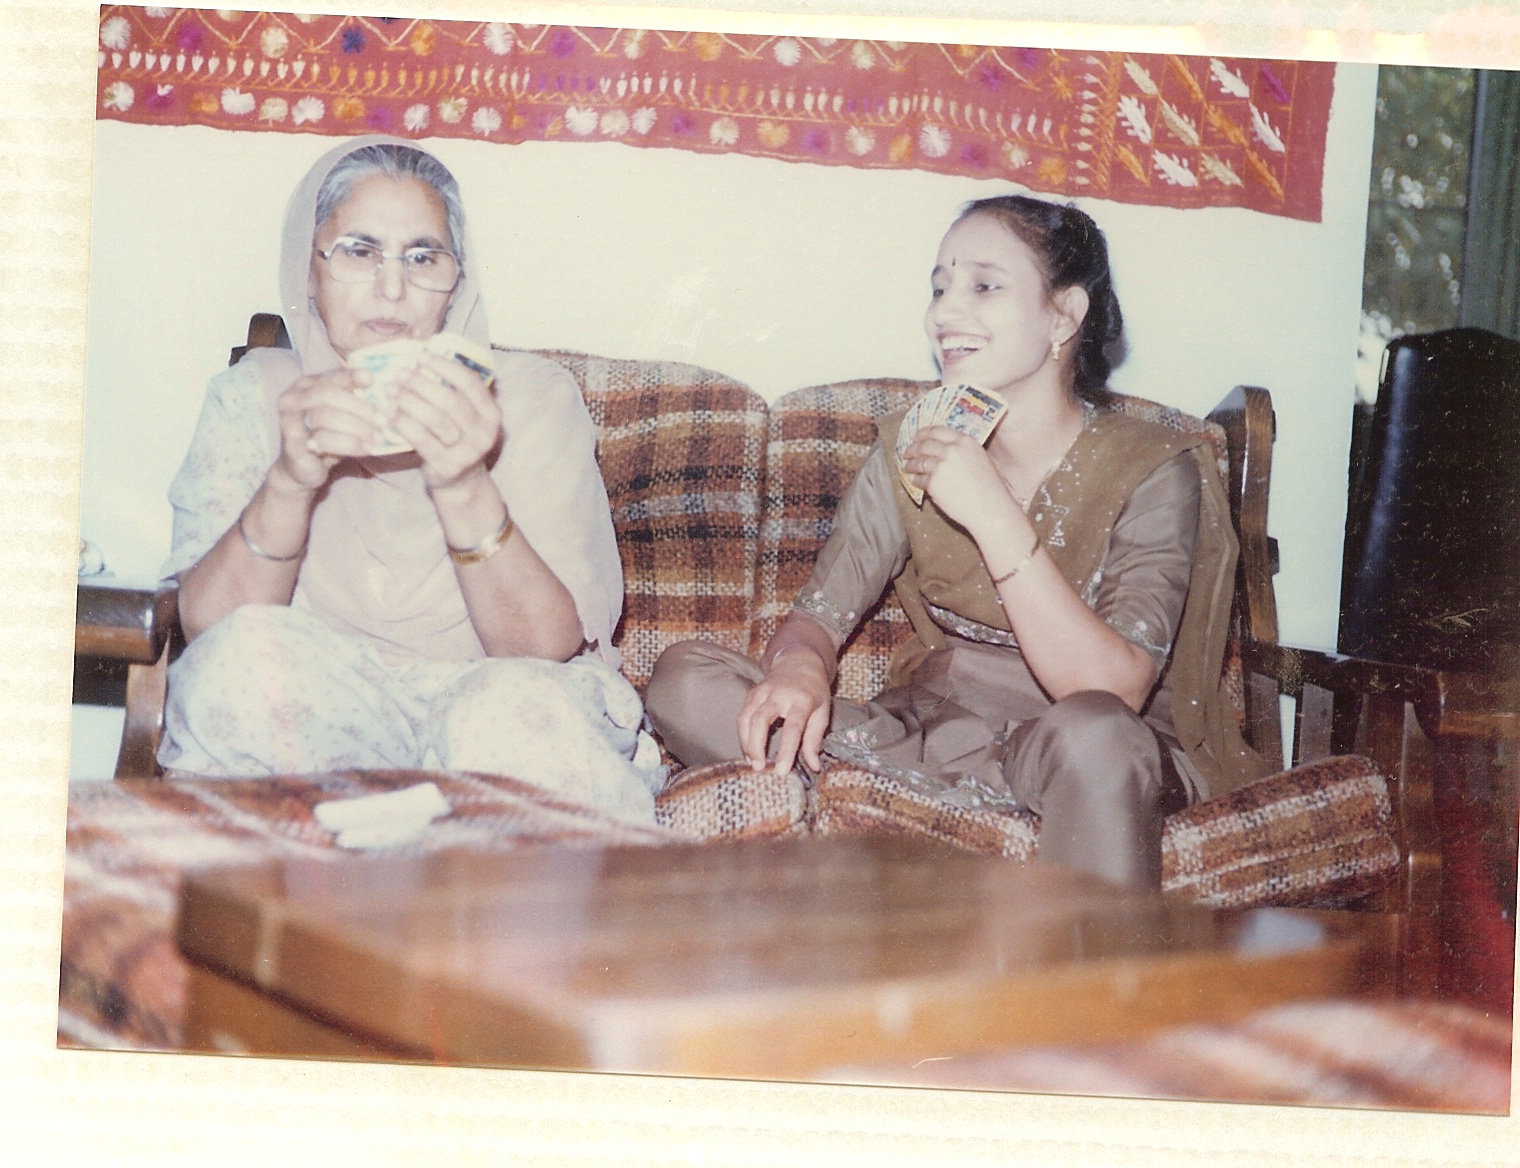 Amar Kaur and Daughter-in-Law, Surinder. Courtesy of the Everest Family.